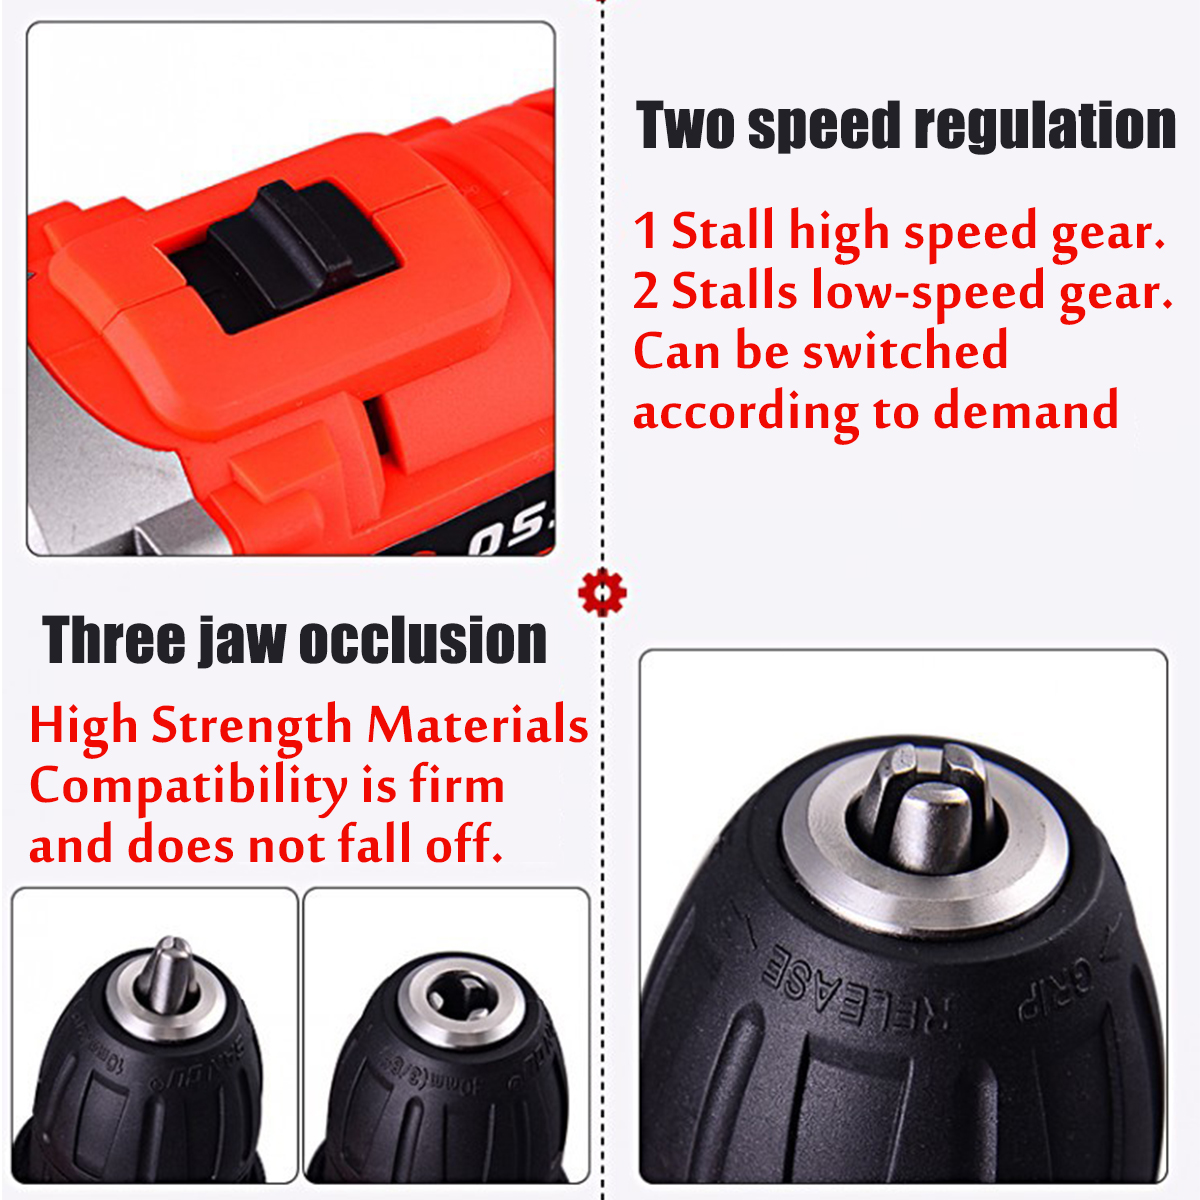 300W-21V-LED-Cordless-Electric-Drill-Screwdriver-1500mAh-Rechargeable-Li-Ion-Battery-Repair-Tools-1421882-4